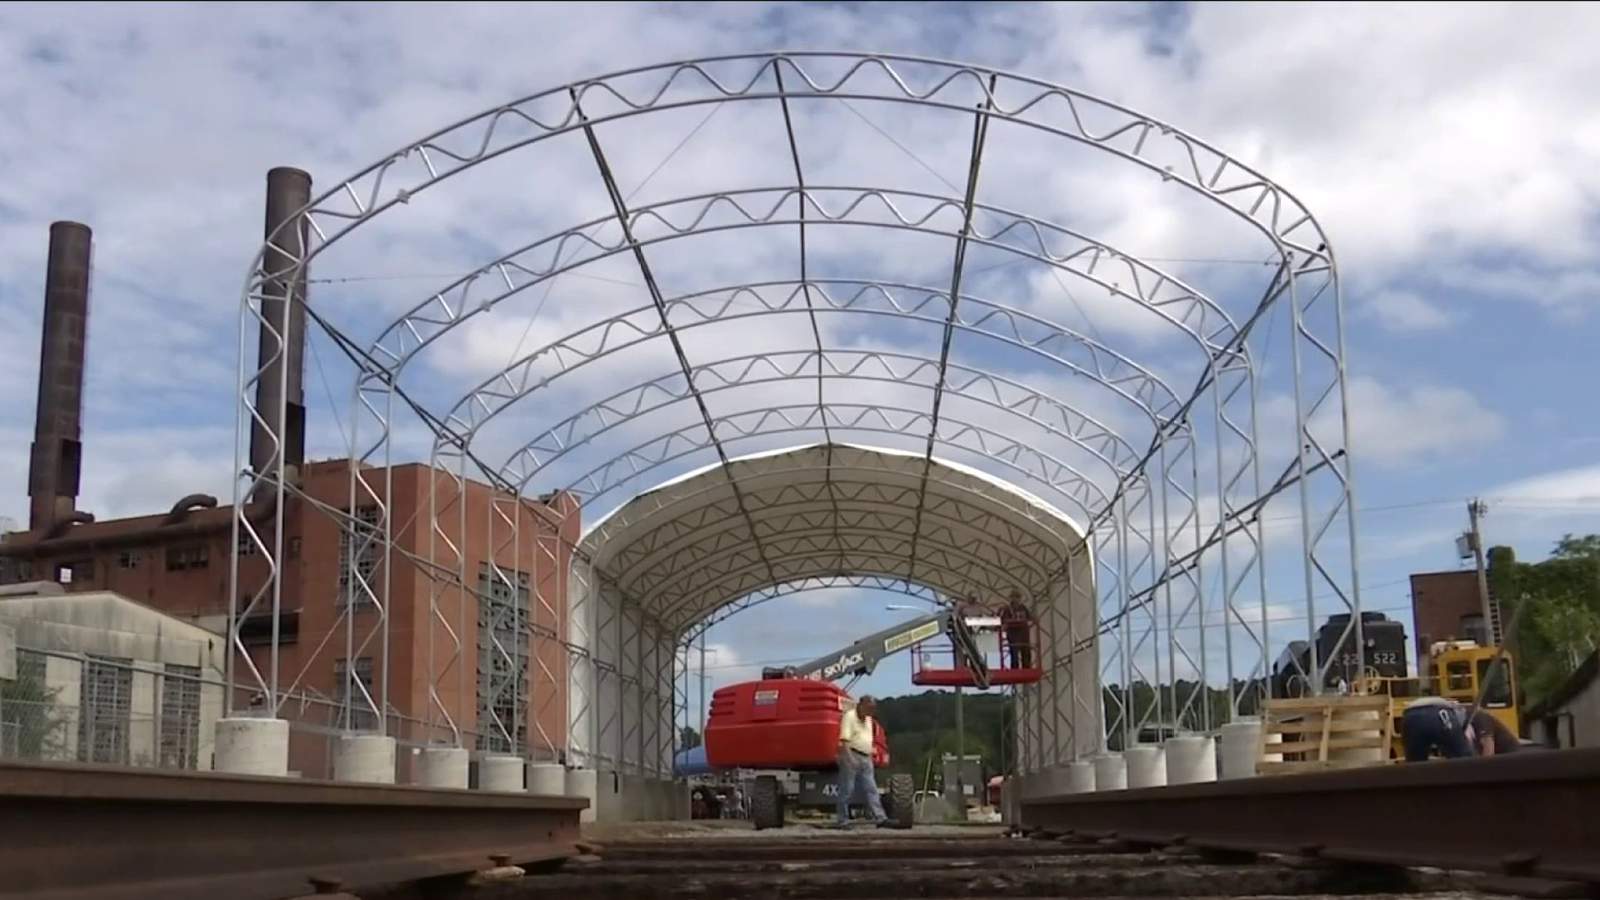 Train history society builds structure to speed up rail car restorations